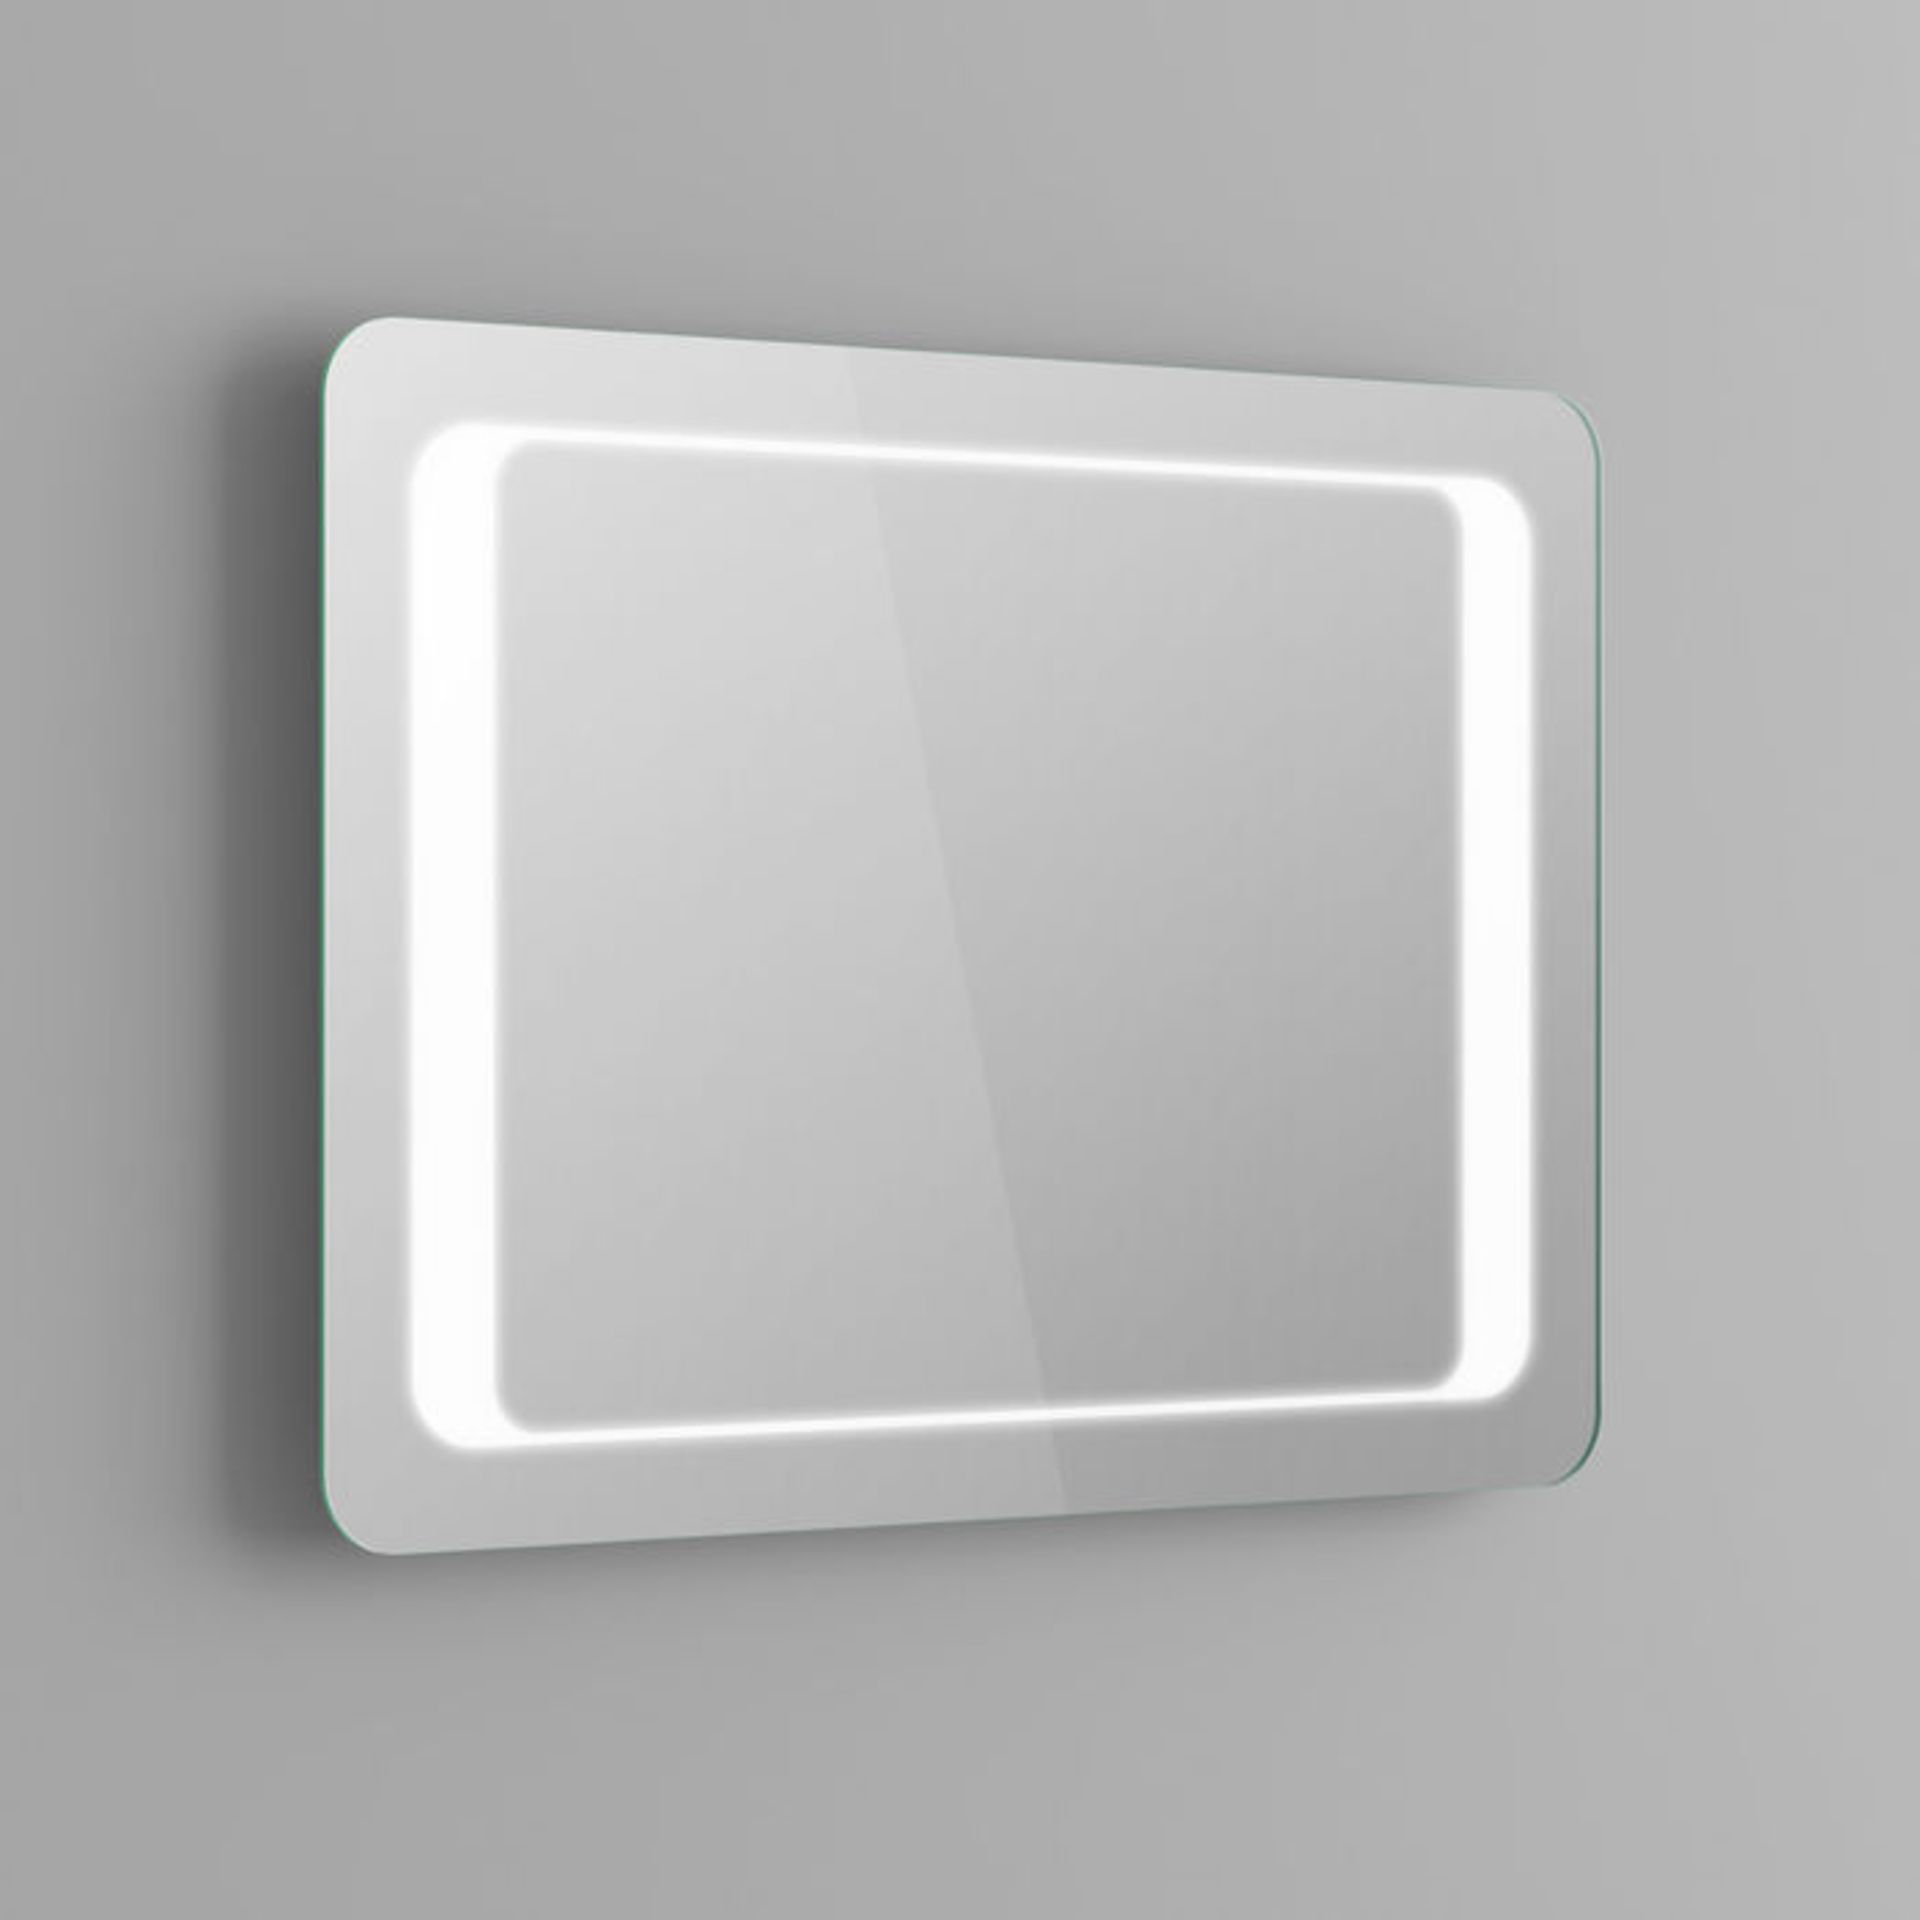 (T64) 800x600mm Quasar Illuminated LED Mirror. RRP £349.99.Energy efficient LED lighting with IP44 - Image 8 of 8